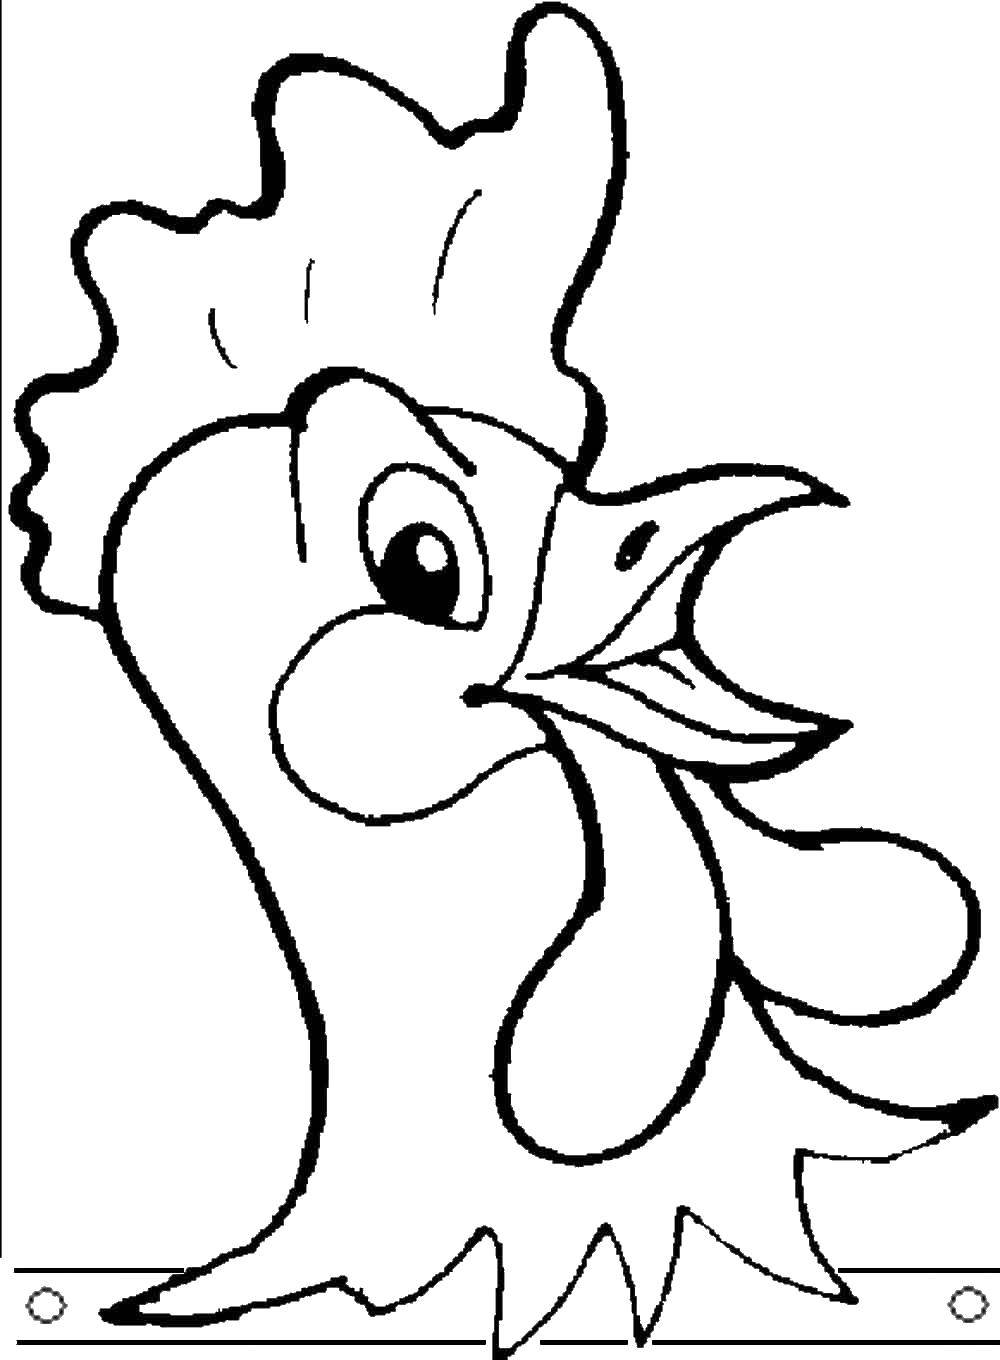 Coloring Cock. Category Coloring pages for kids. Tags:  Animals, Cockerel.